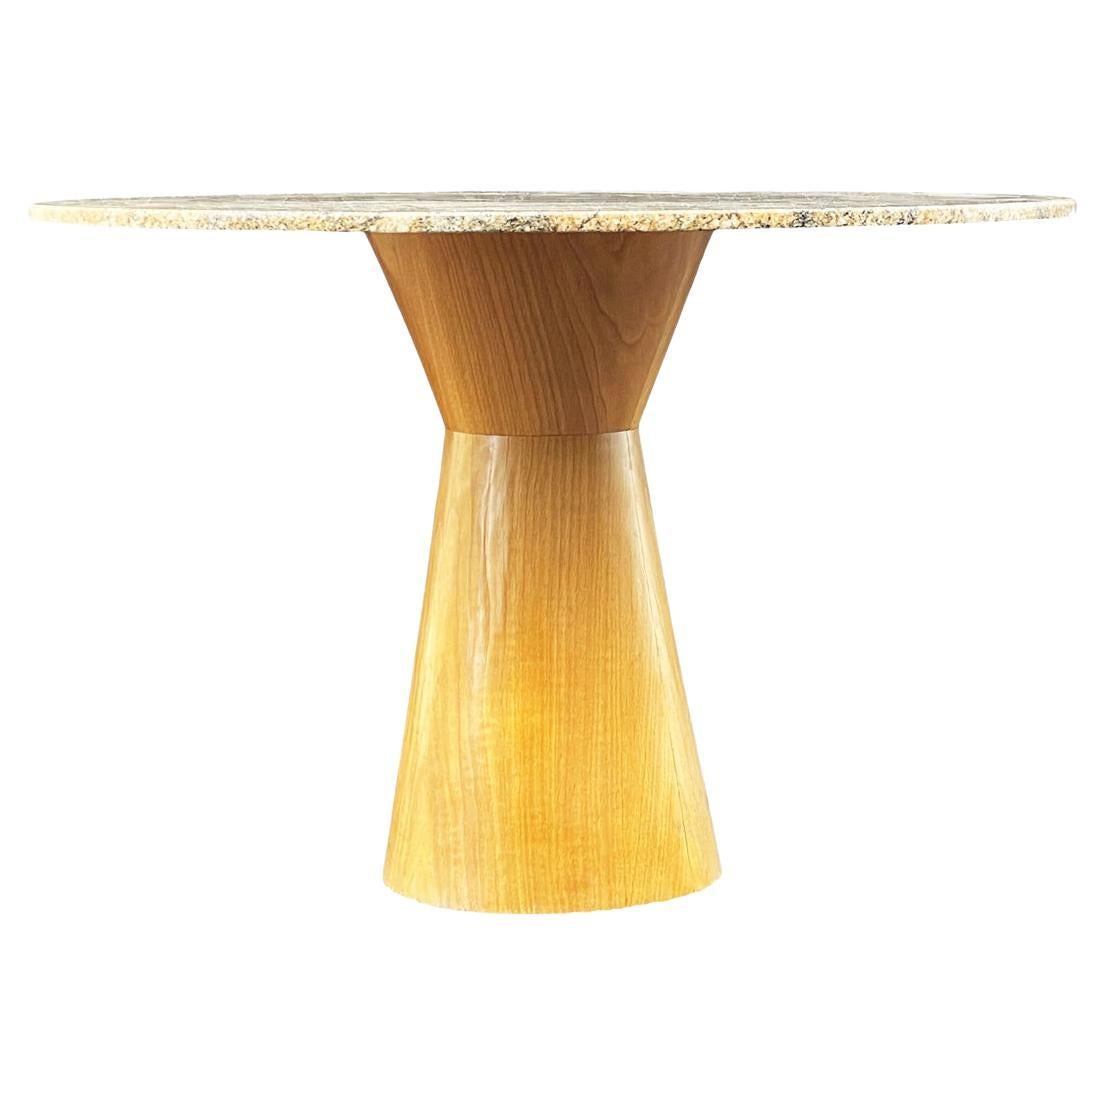 Midcentury Italian Post Modern Marble Circular Dining Table & Blonde Wood Base For Sale